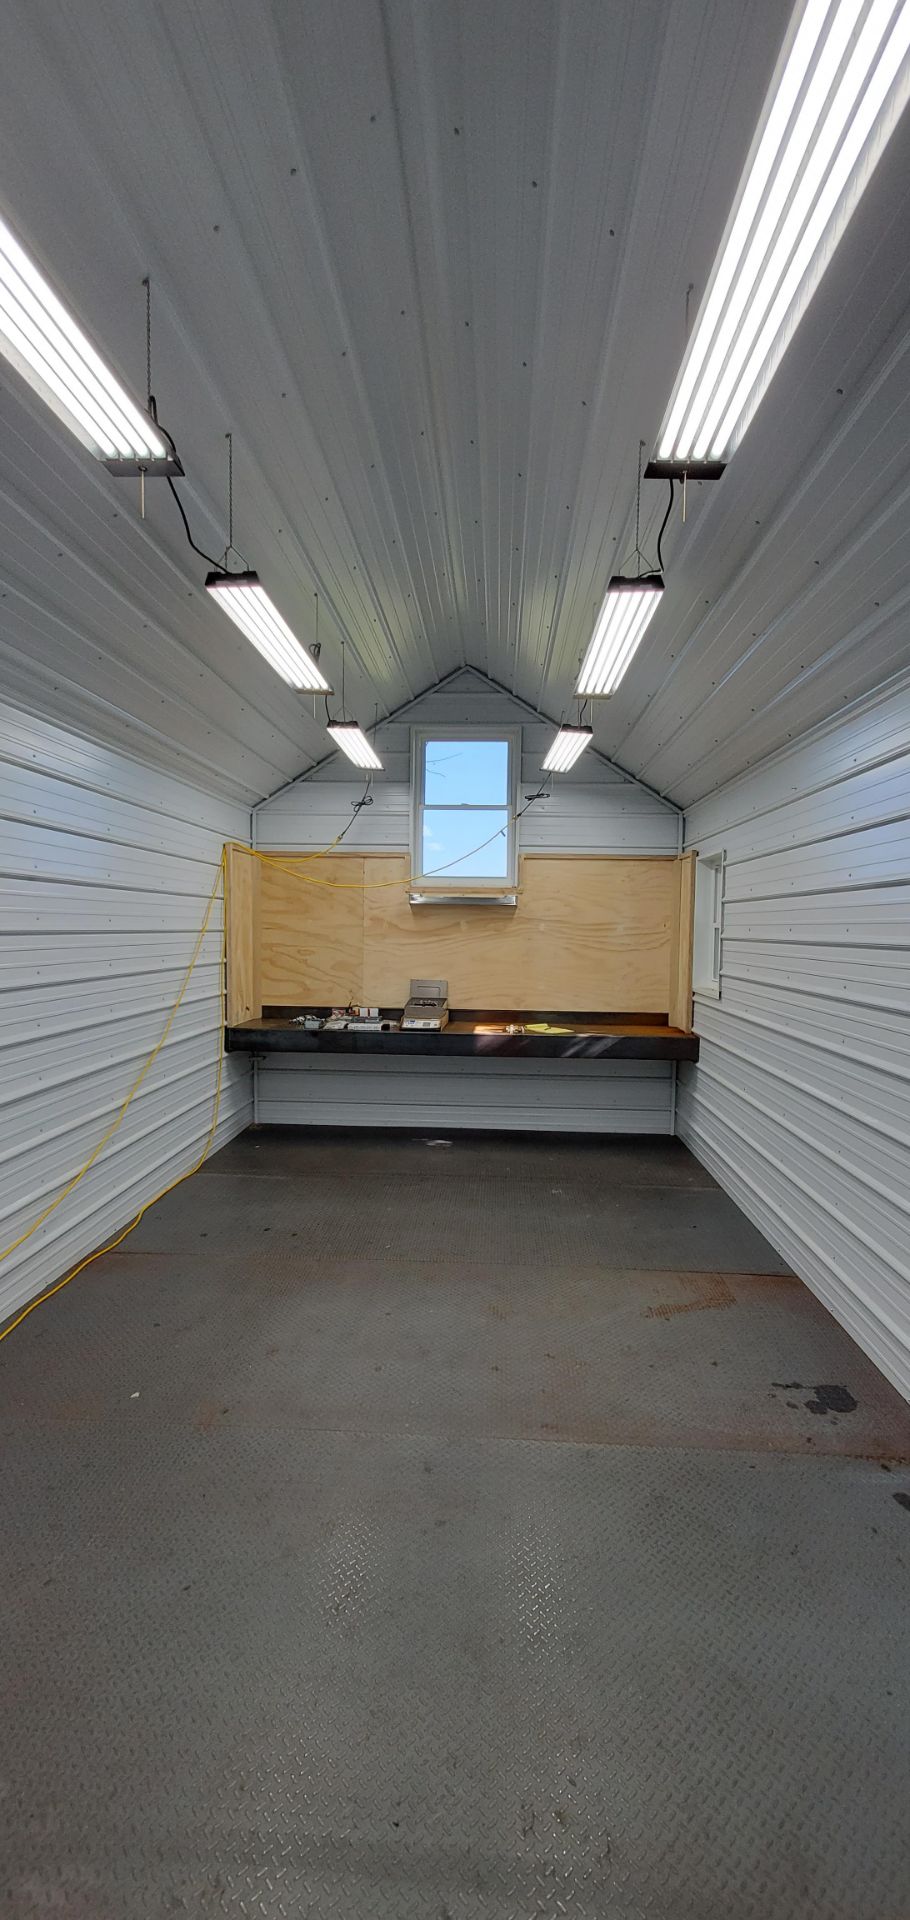 Yoder Portable 12’ x 24’ x 13' 4" High Garage Building, Full 8’ Walls, Like New, Fully Insulated, - Image 8 of 8